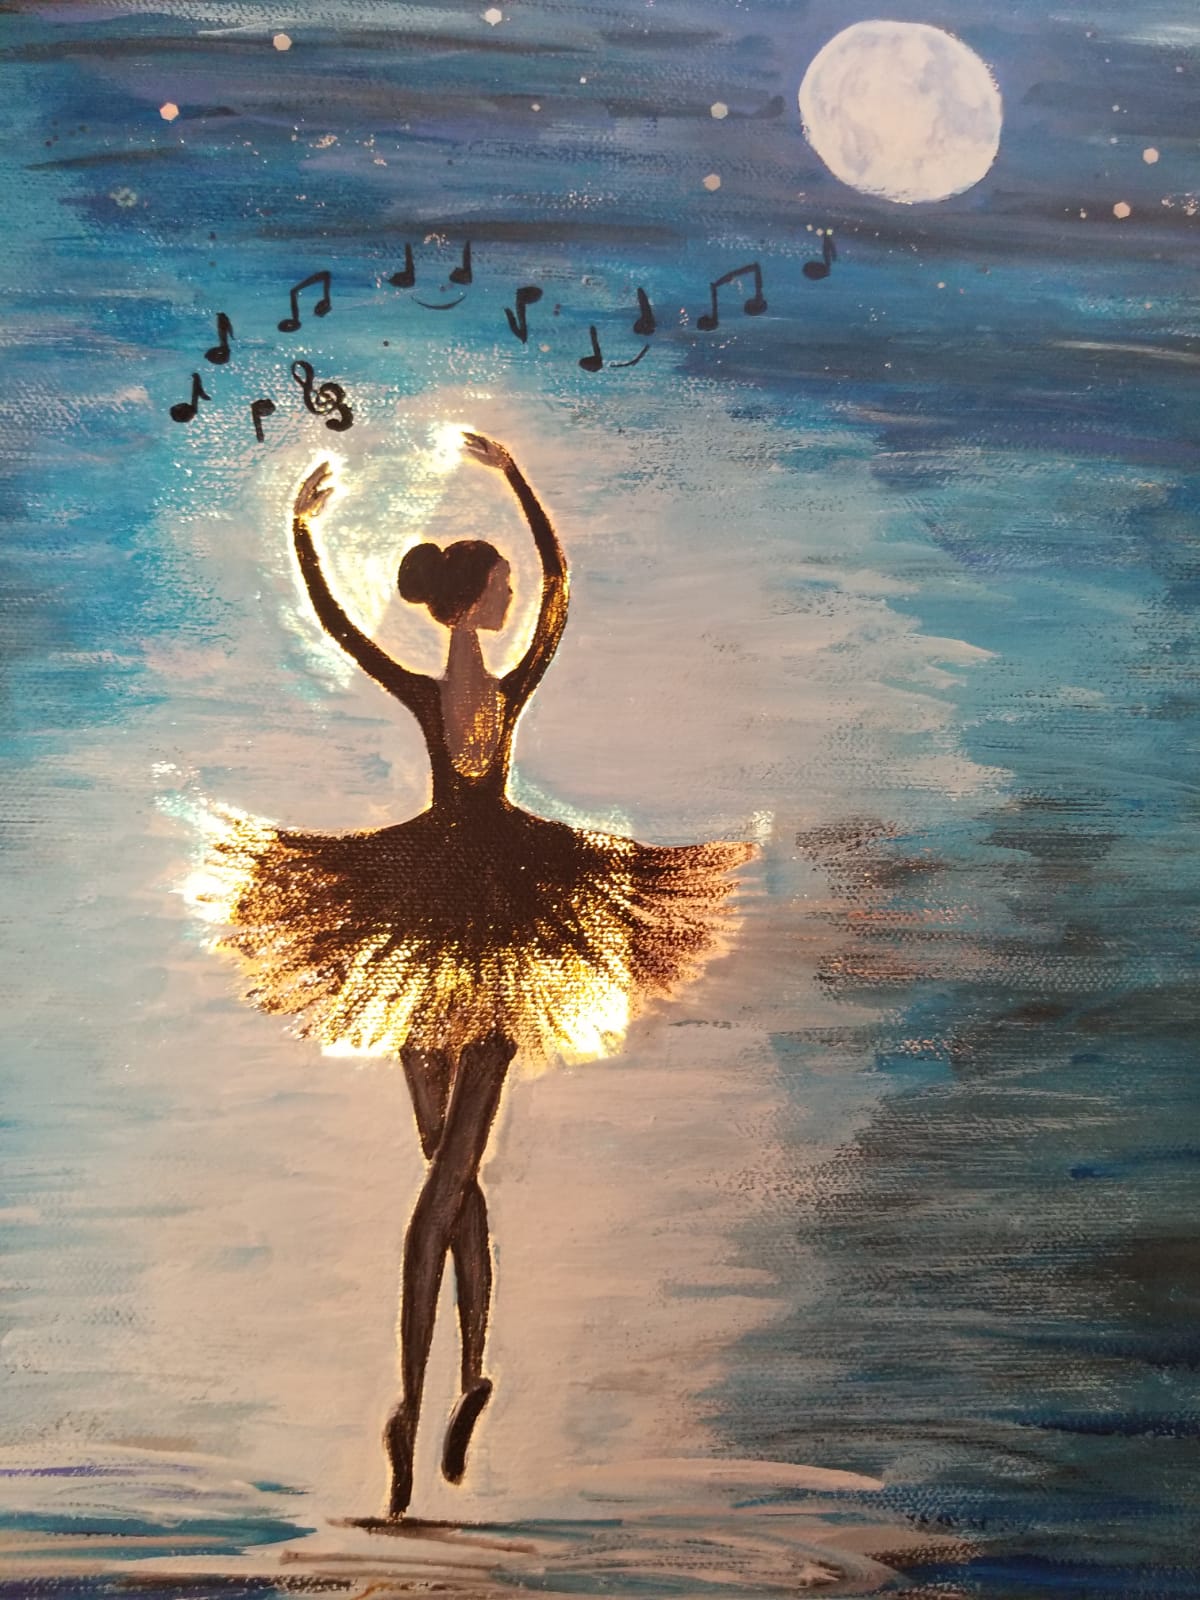 Painting of a ballerina in mid-pirouette with moon and musical notes in the sky 